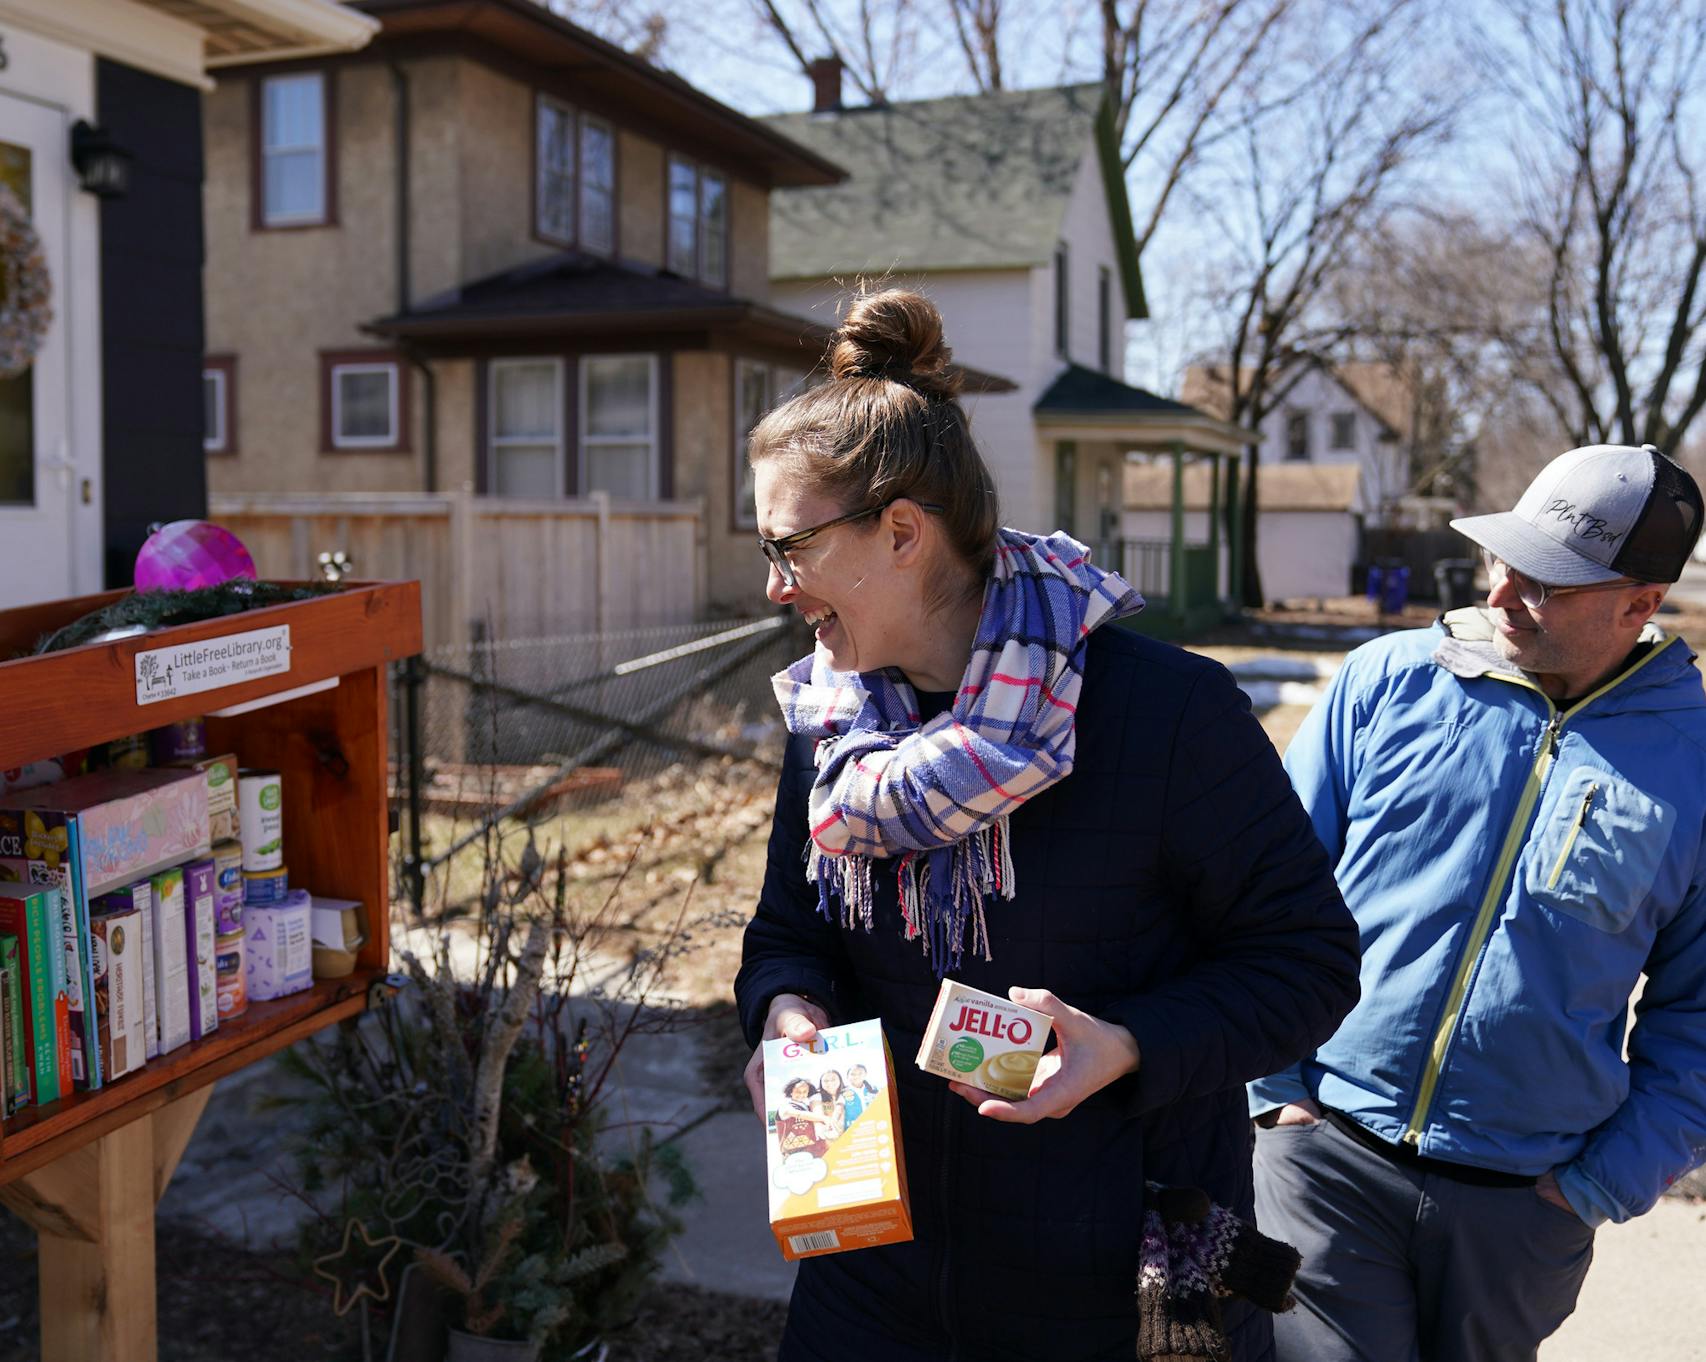 Diana Neidecker and her spouse Blake Ward, who started filling the little free library outside their home with grocery items on Monday to help those impacted by the Coronavirus. 